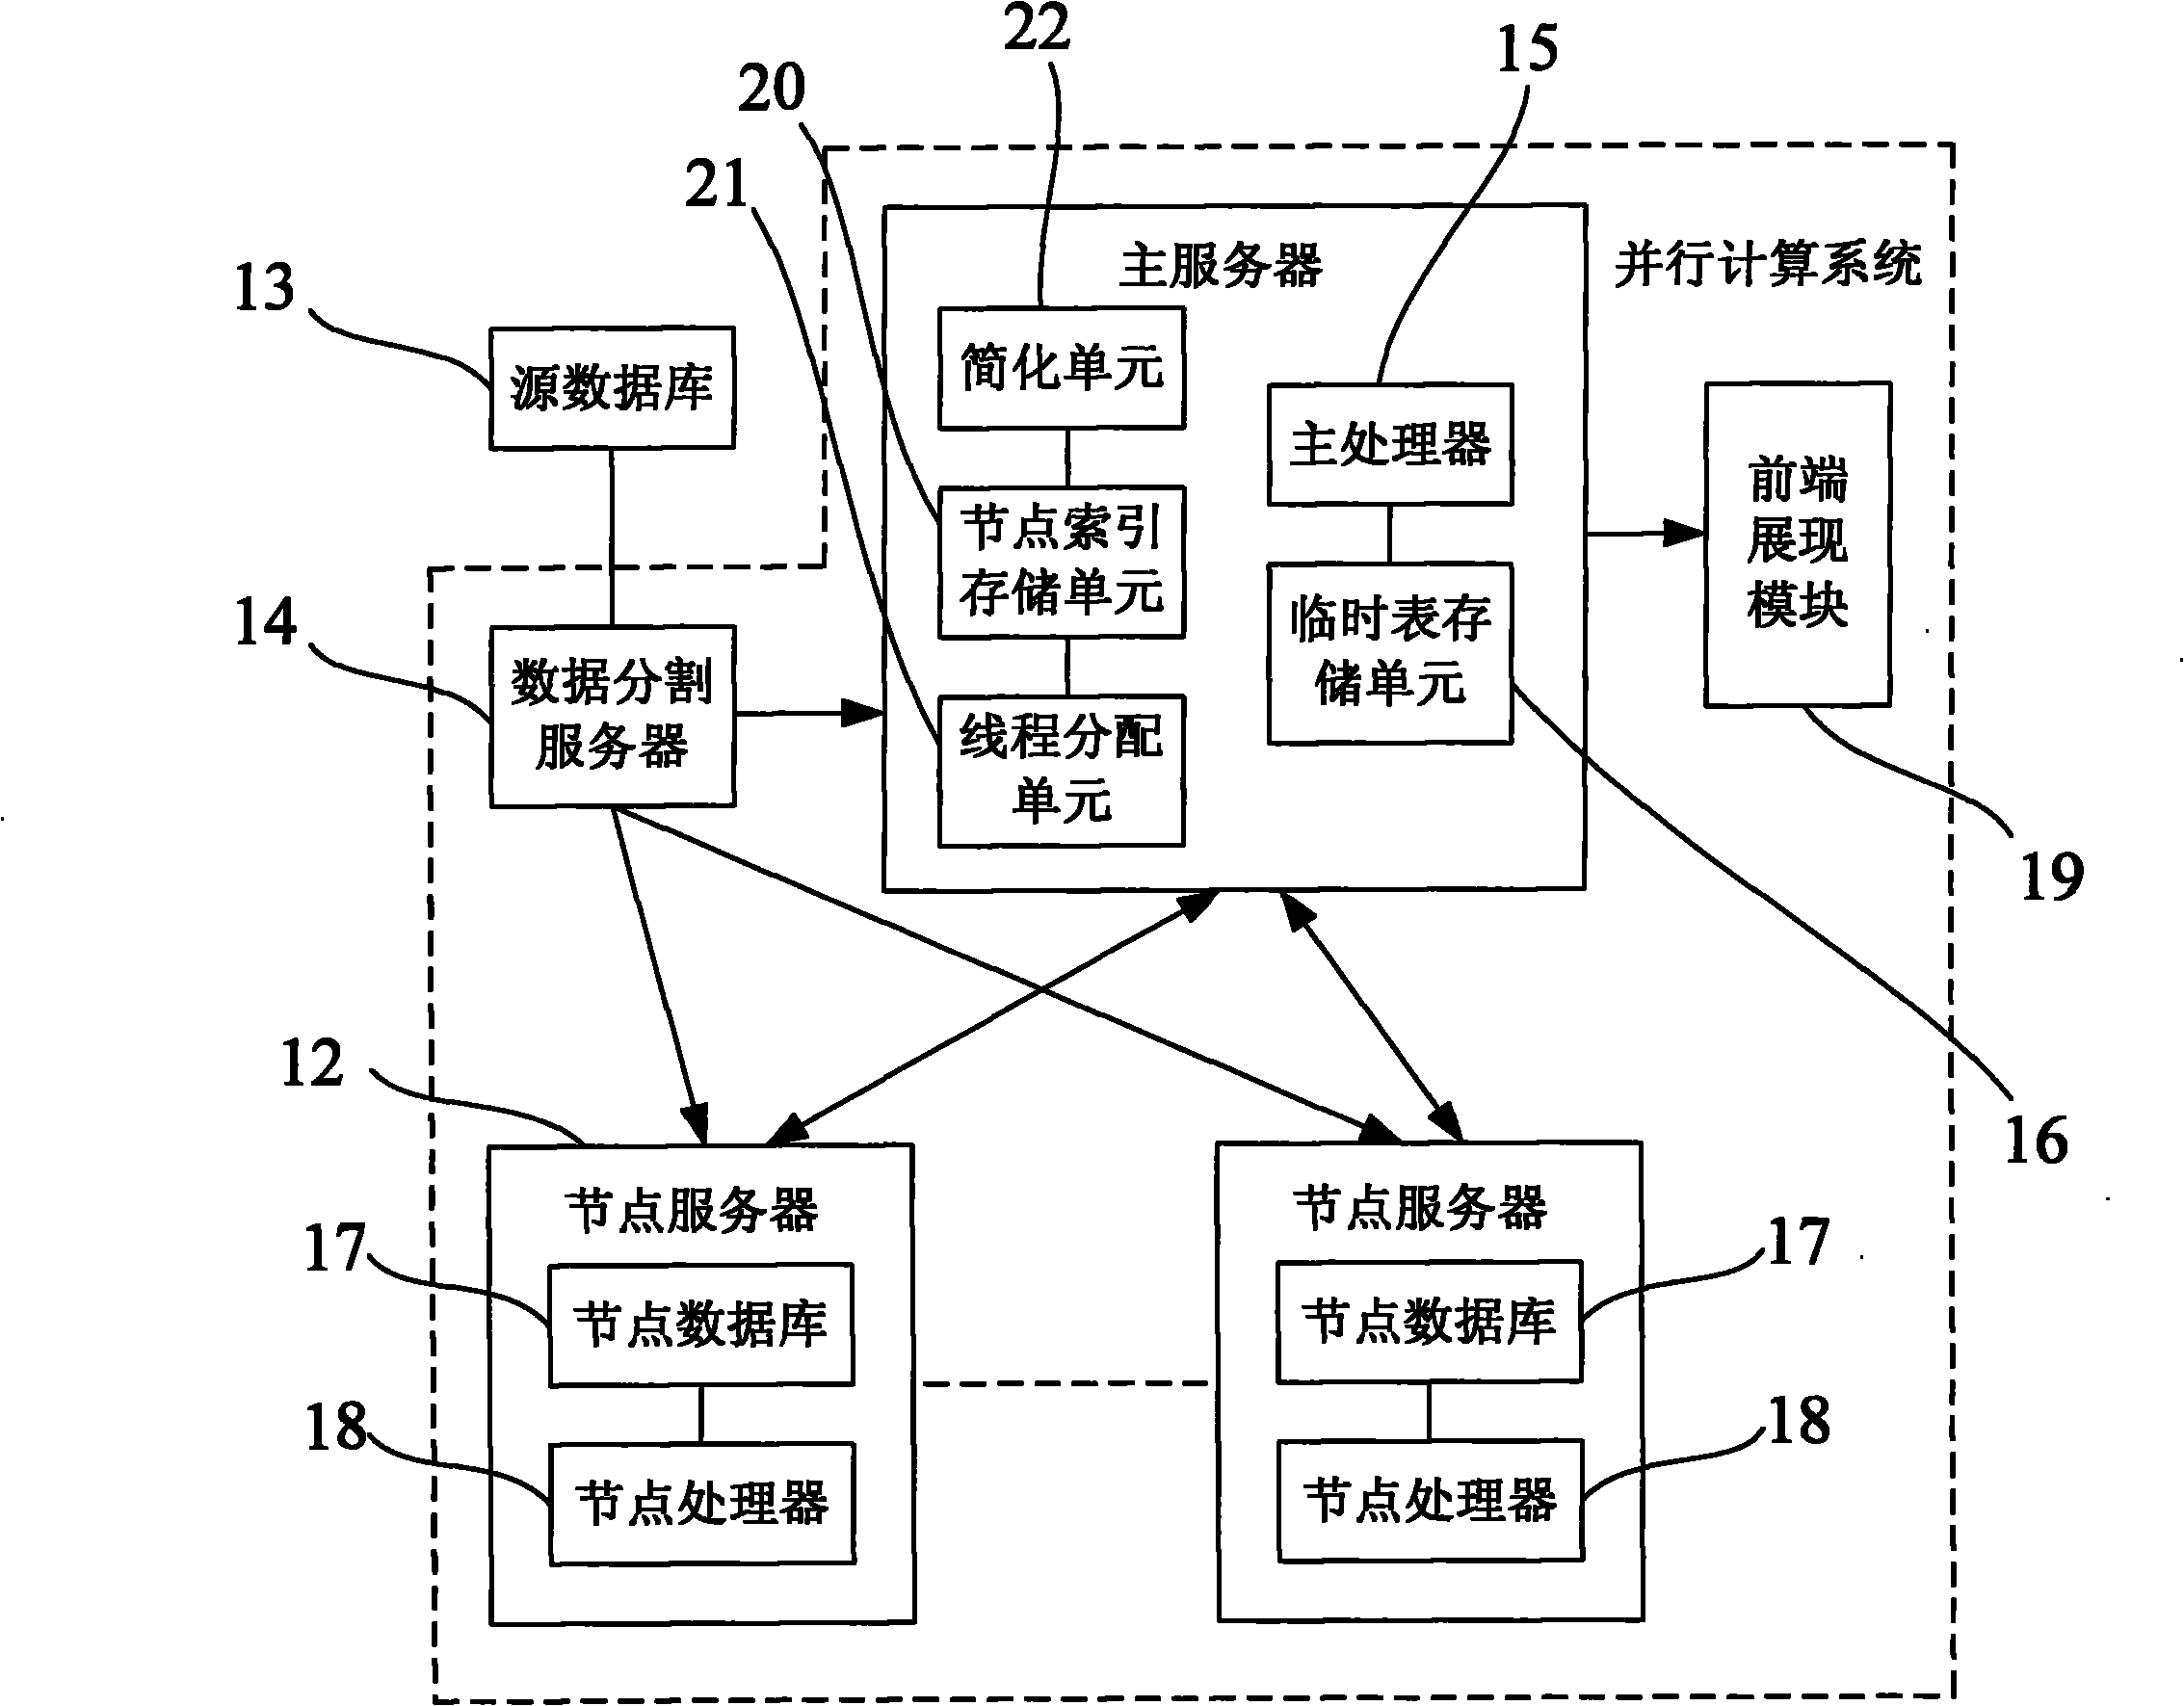 Parallel computing system and method for carrying out load balance according to query contents